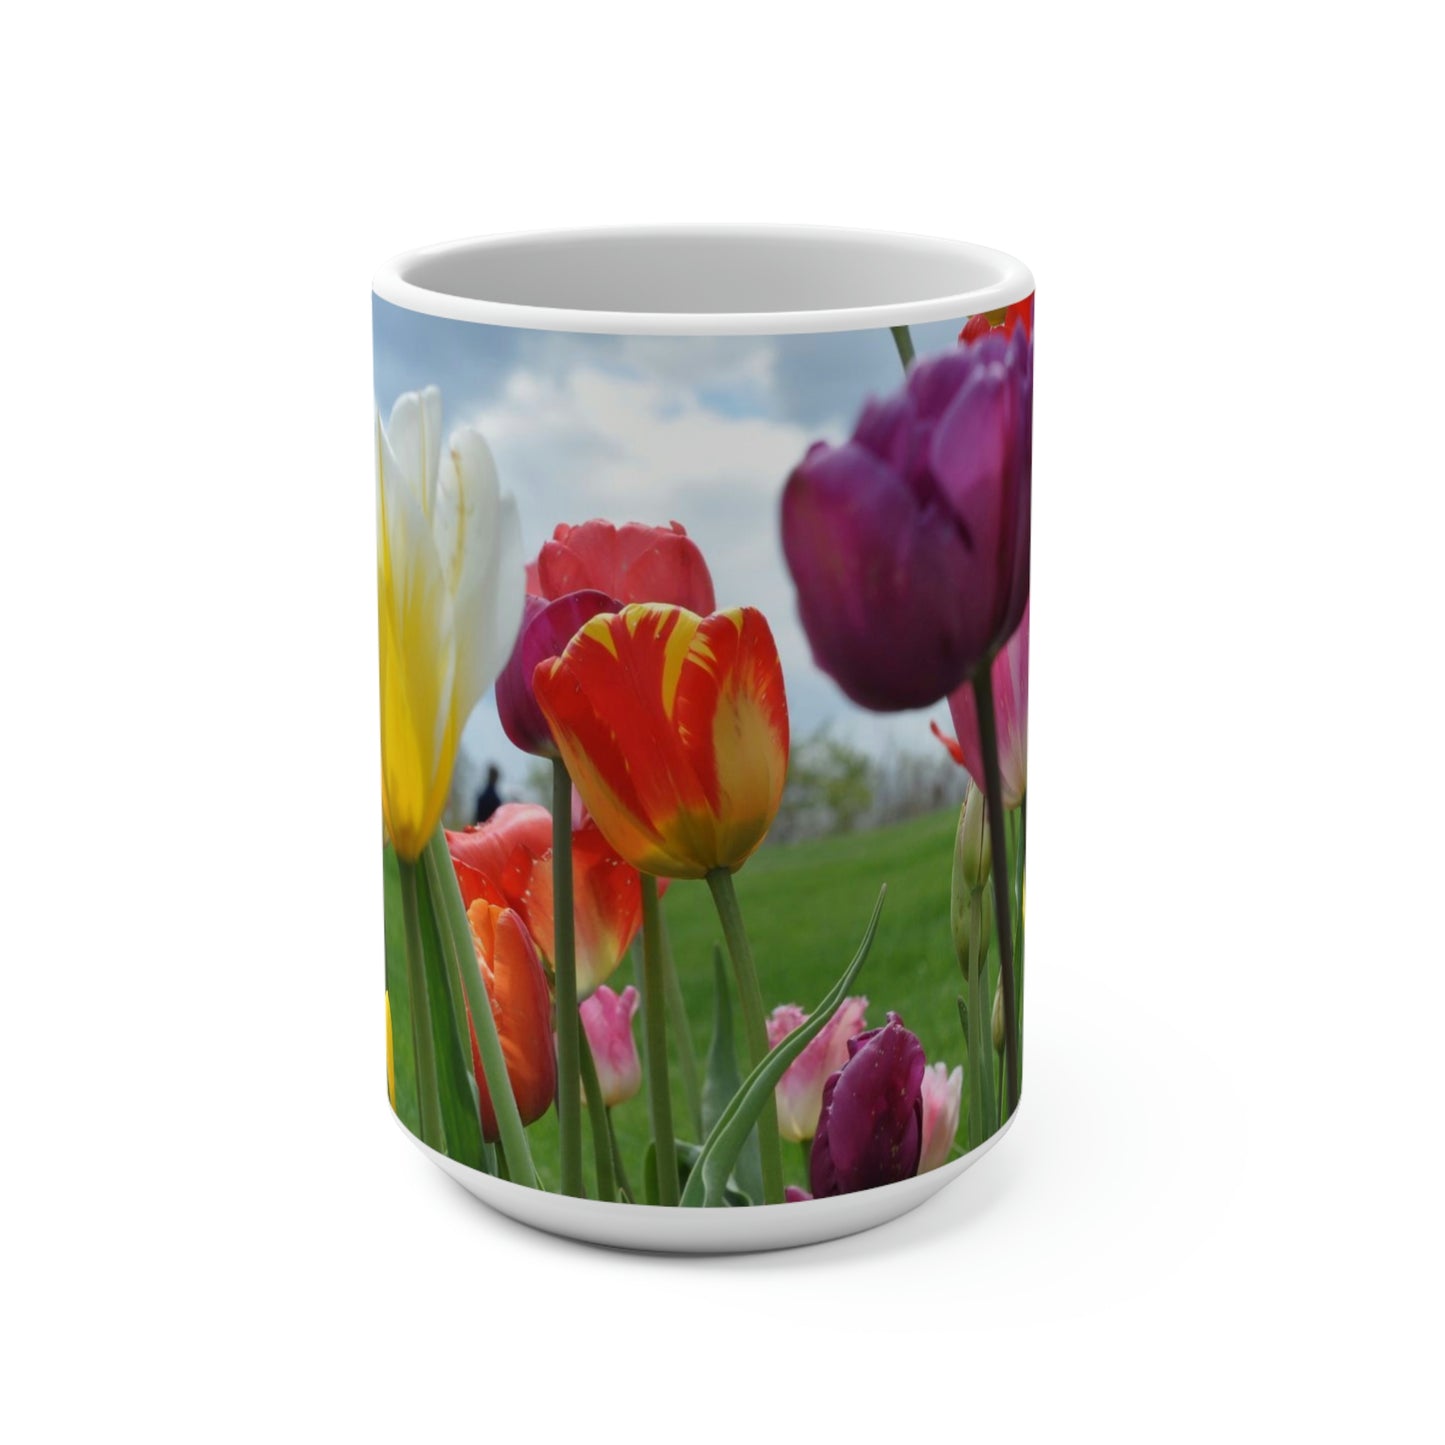 Tulip Coffee Mug | Mother's Day Gift | Gift for Her | Tulip Teacup | Flower Coffee Mug | Tulip Gift